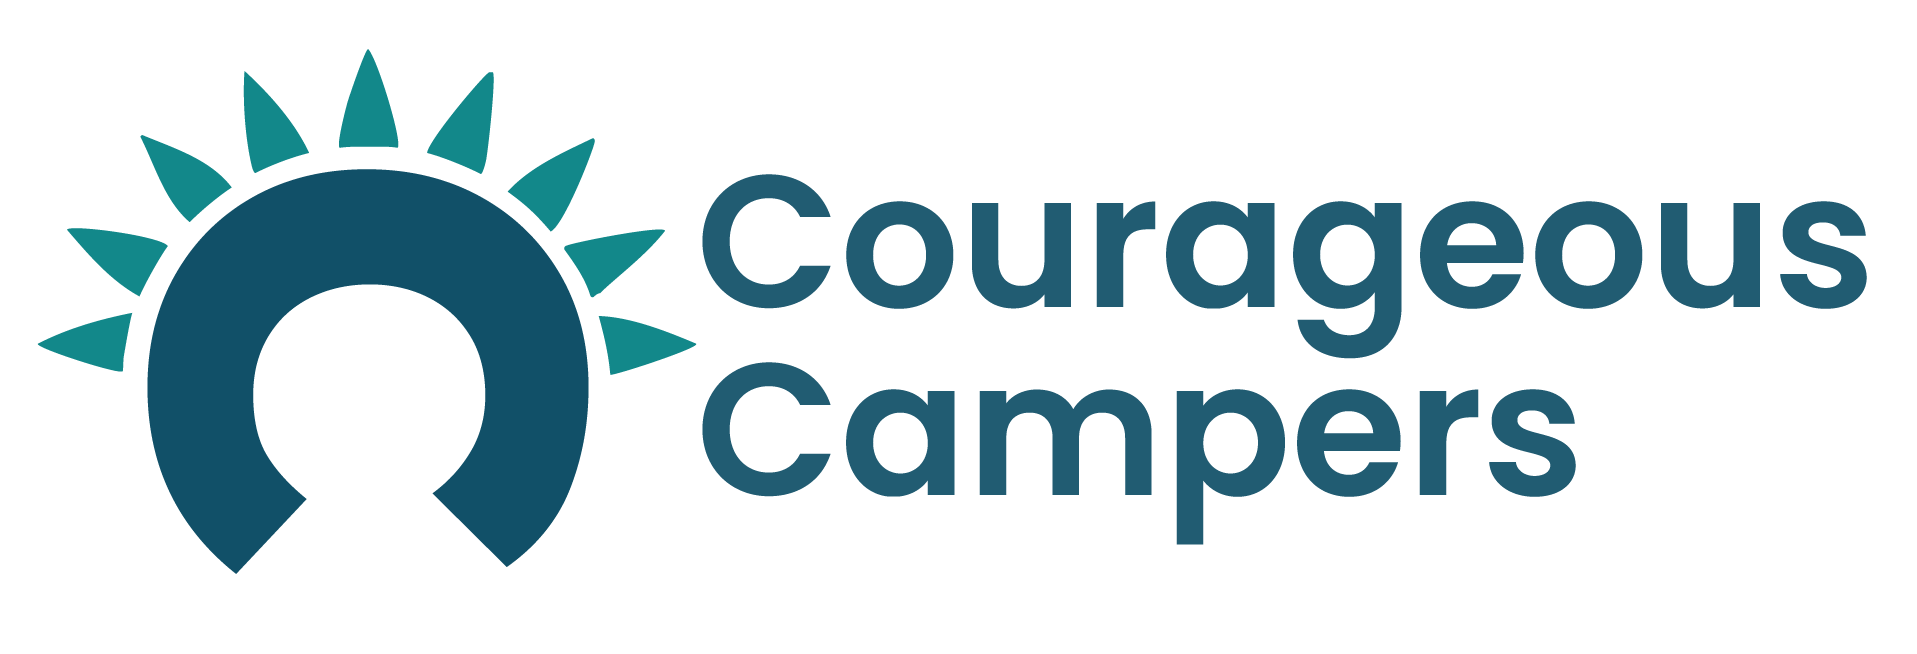 <b>COURAGEOUS CAMPERS</b>